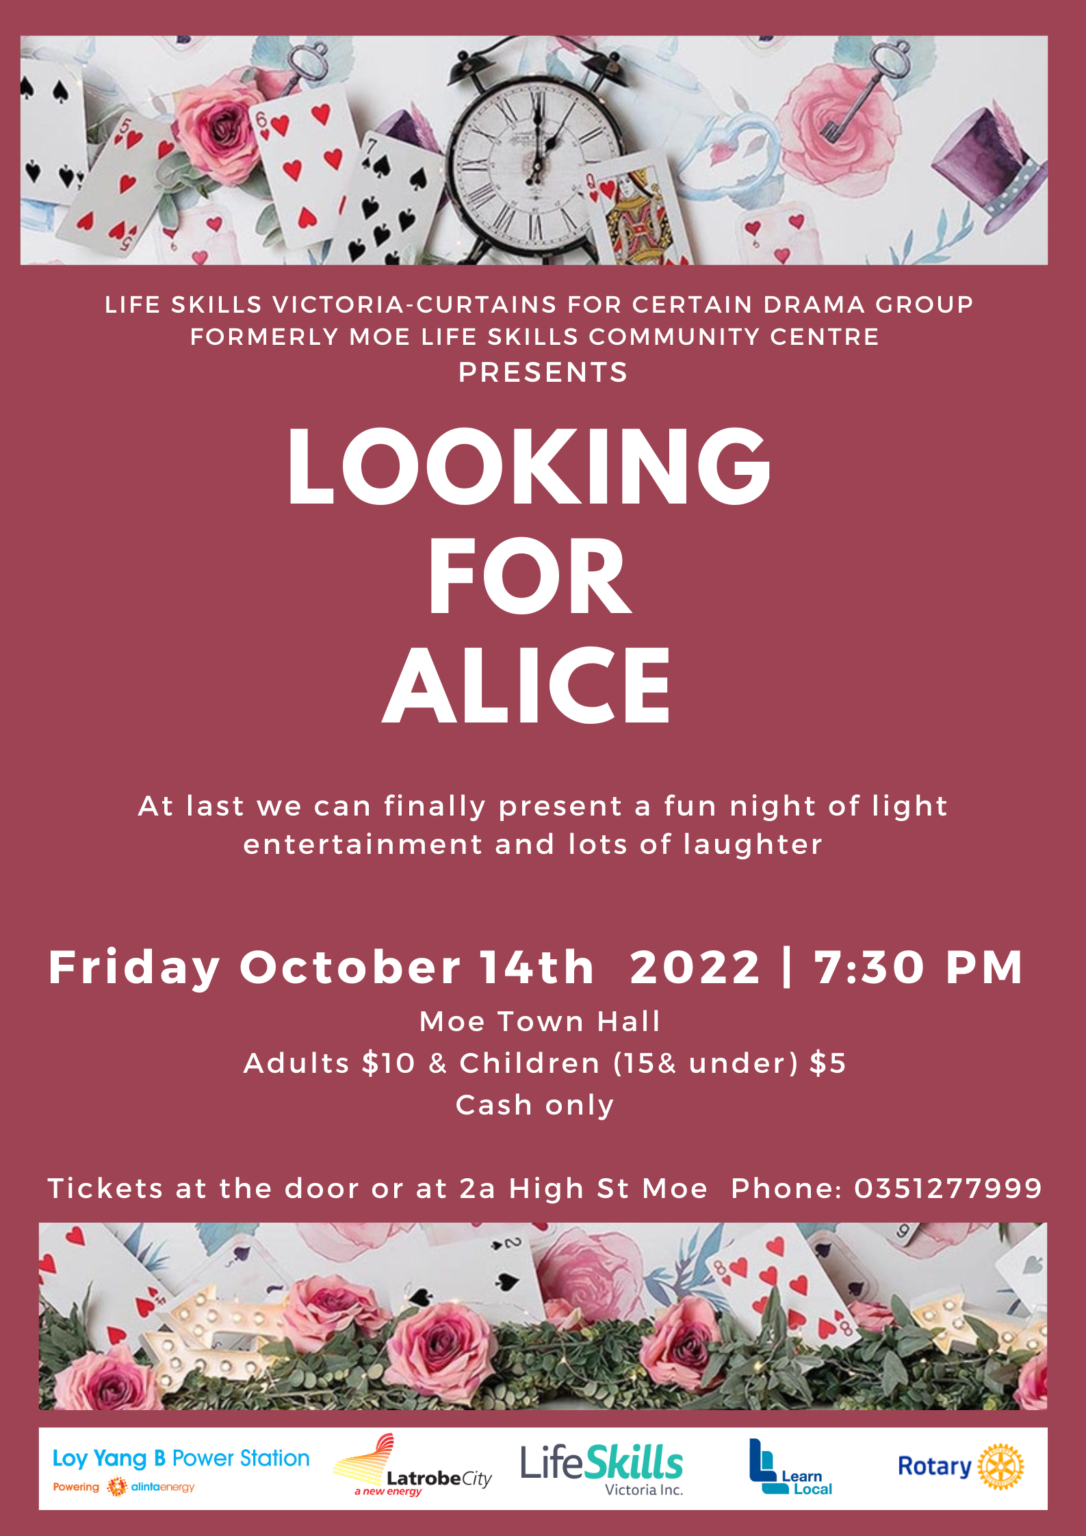 Looking for Alice - 14 October 2022 - Life Skills Victoria Inc.